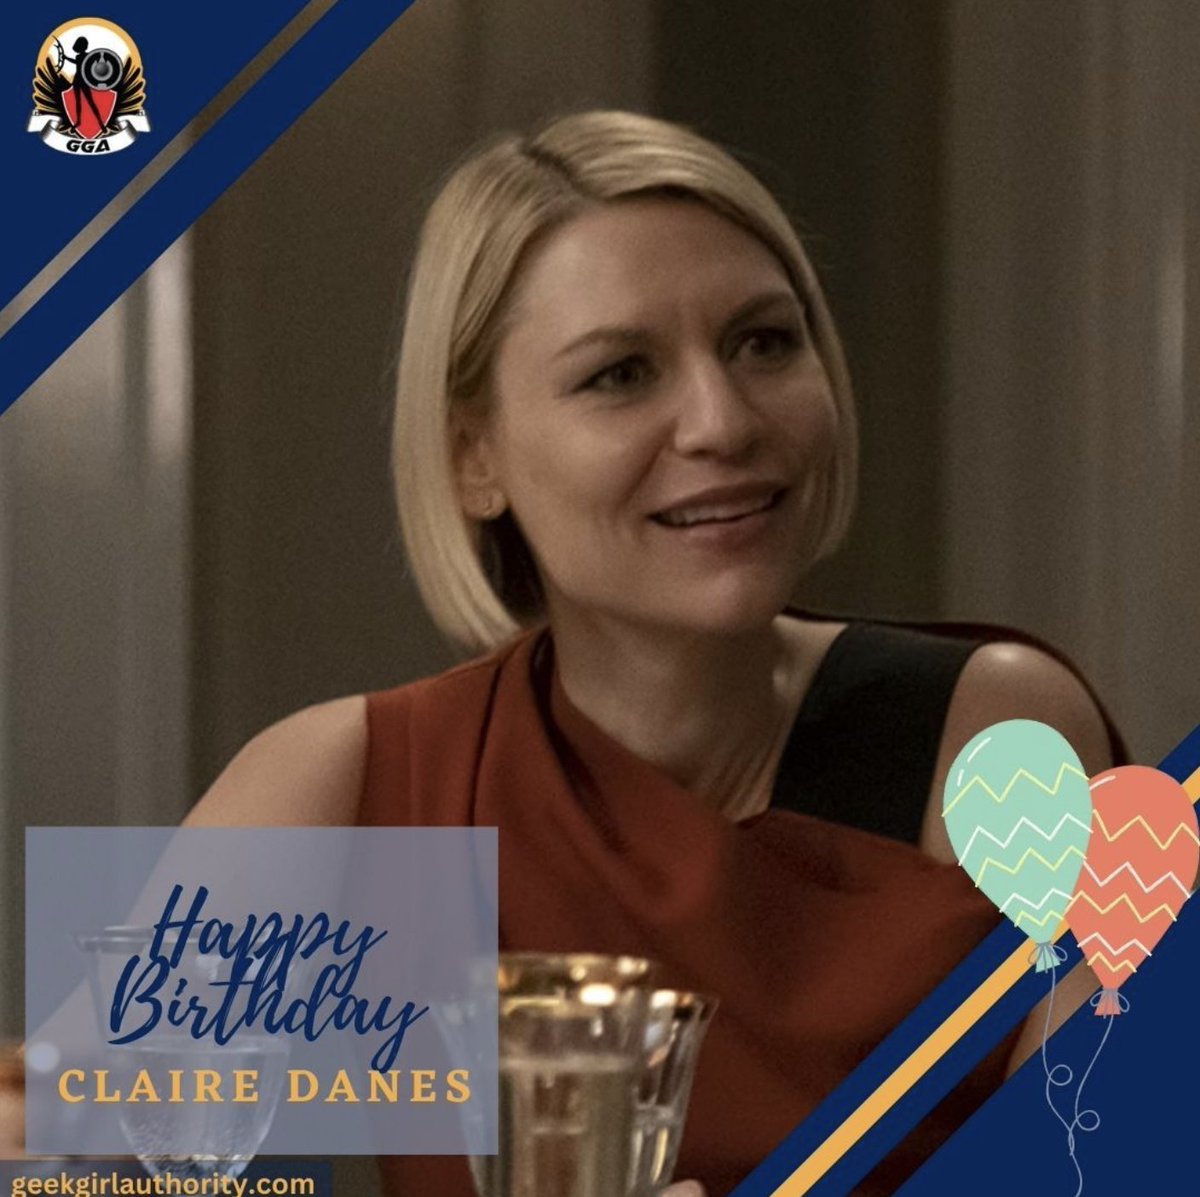 Happy Birthday, Claire Danes! Which one of her roles is your favorite? #Homeland #RomeoAndJuliet #MySoCalledLife